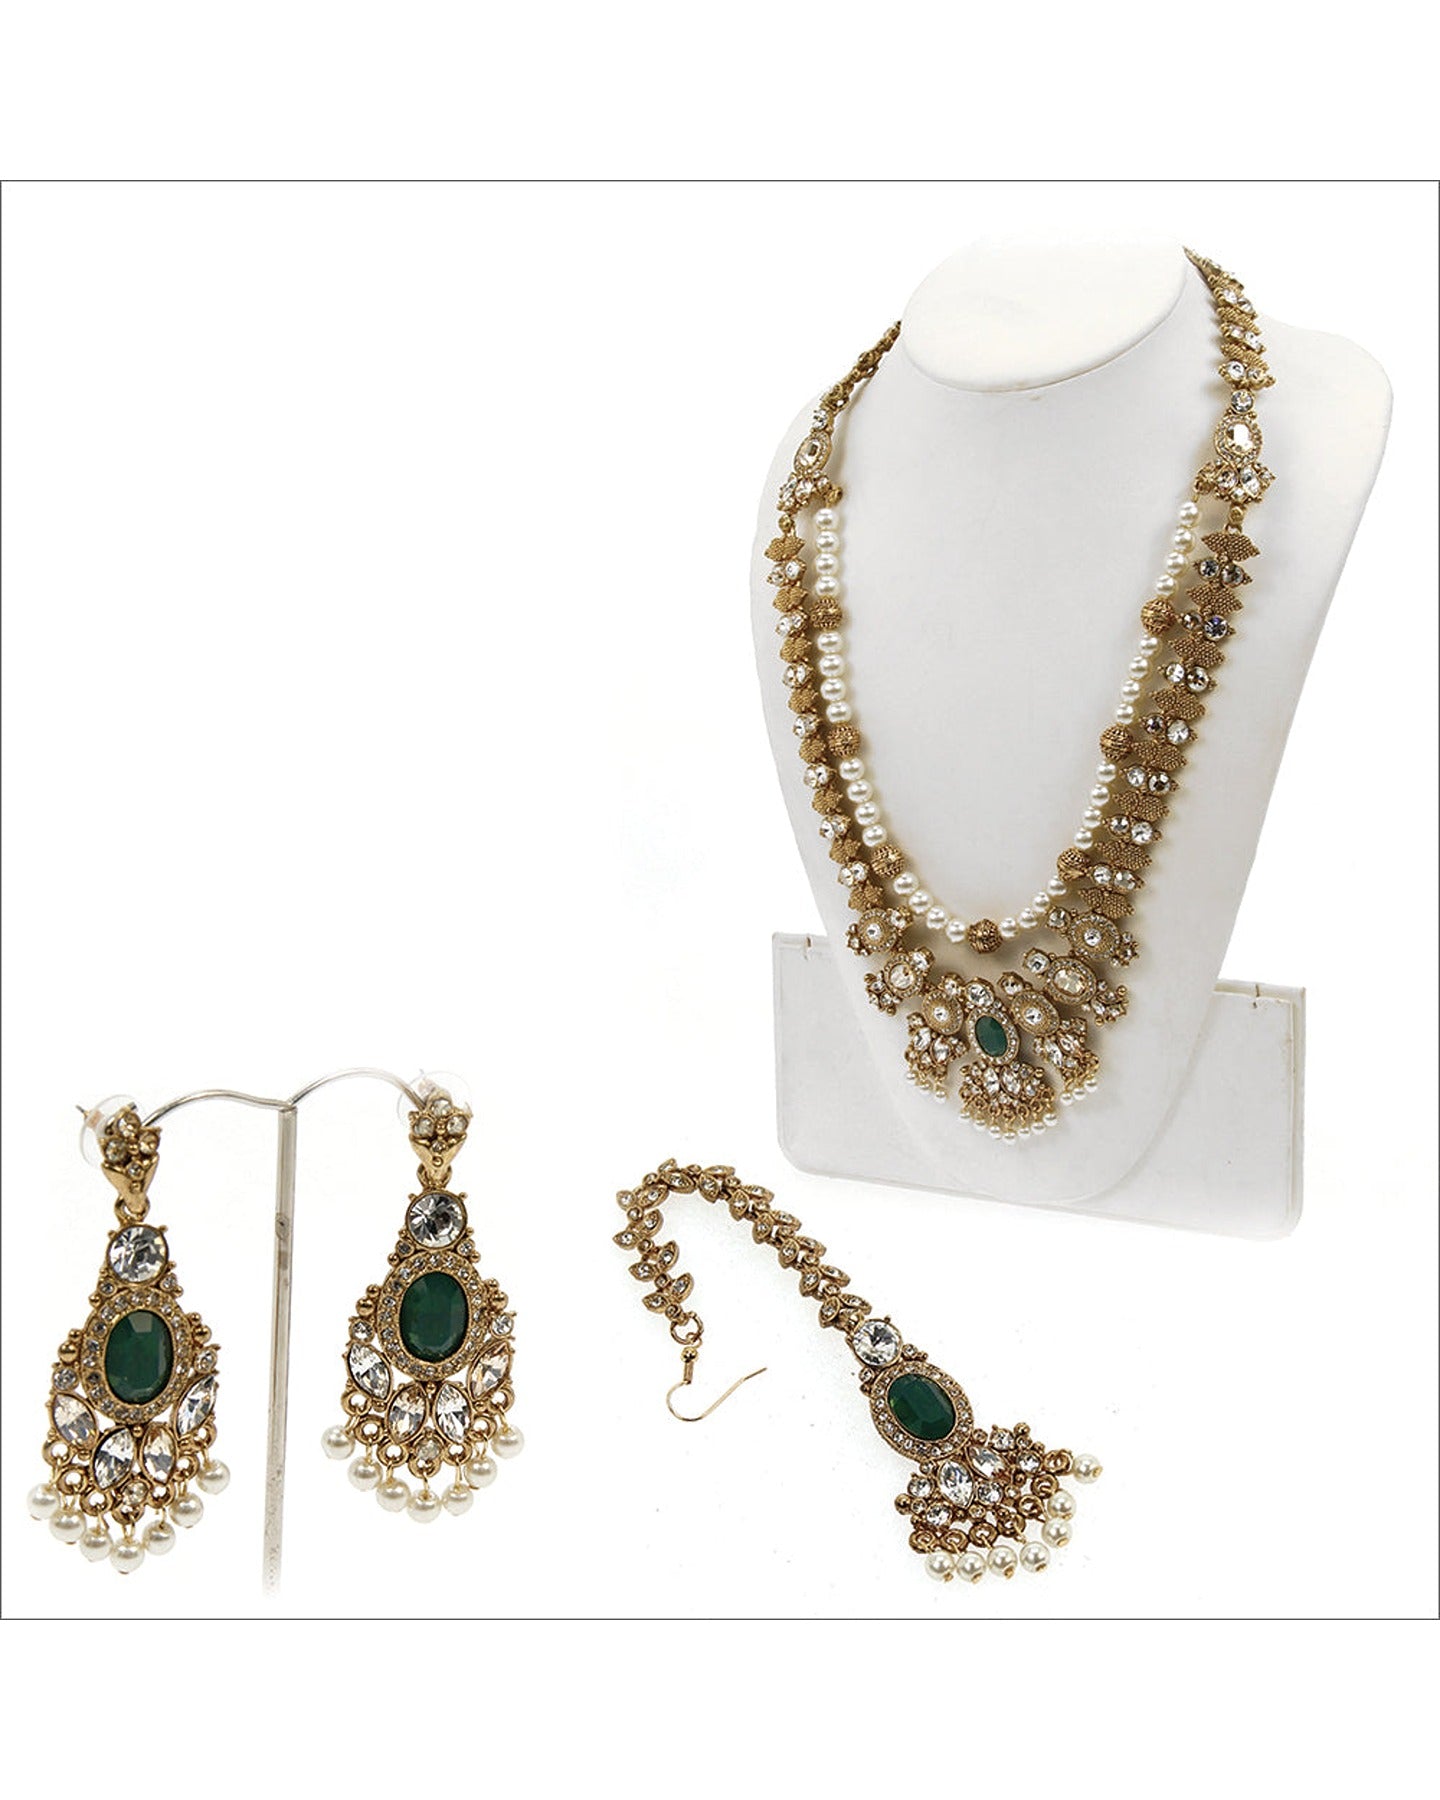 Antique Gold Jewelry with Palace Green Opal and Crystal Golden Shadow Stones